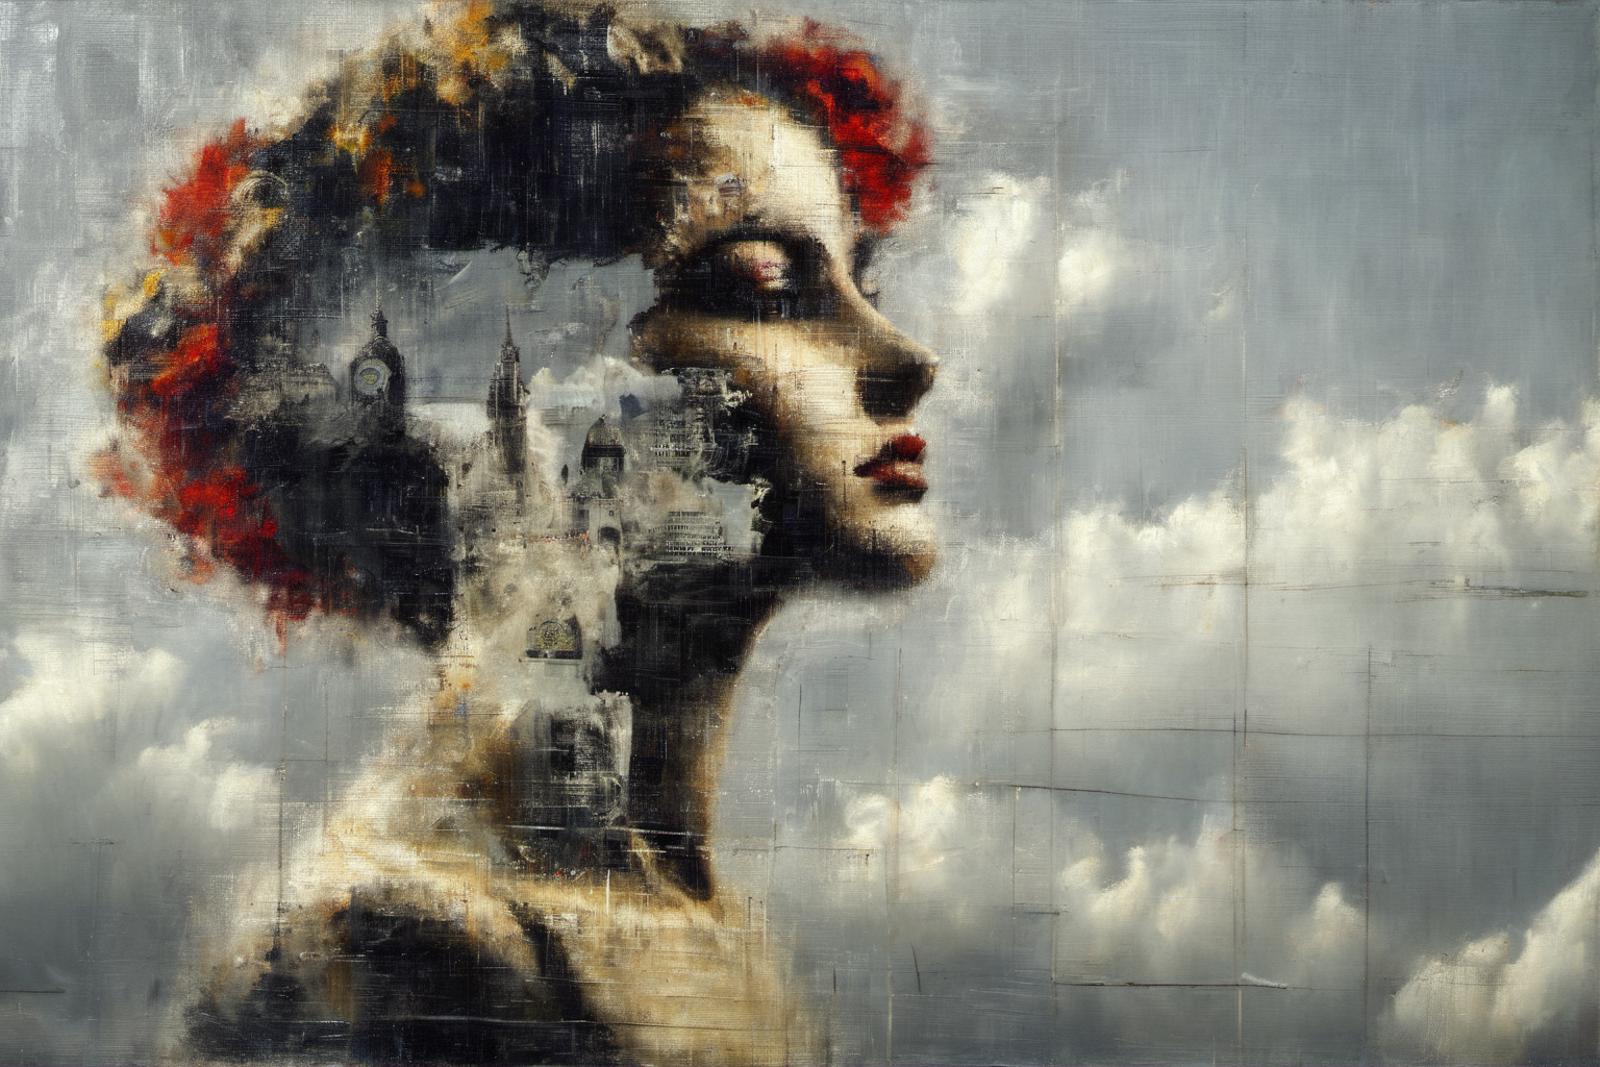 A woman's face is painted in a surreal, abstract style, with clouds and buildings surrounding her as she gazes into the distance.